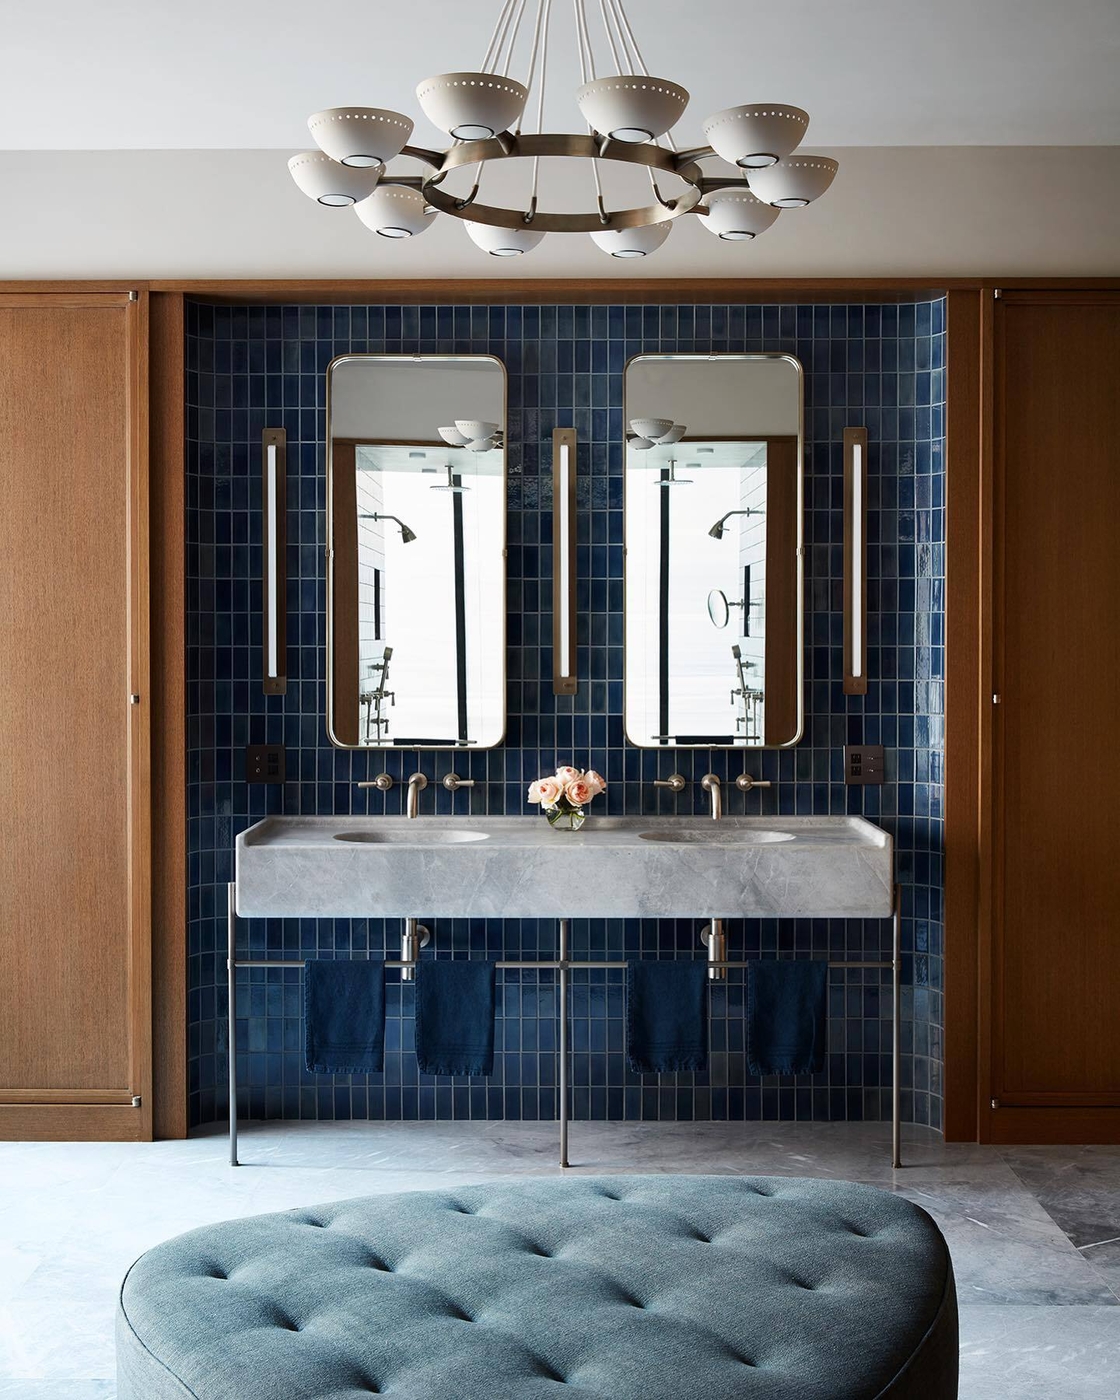 Opt for Blue Subway Tiles